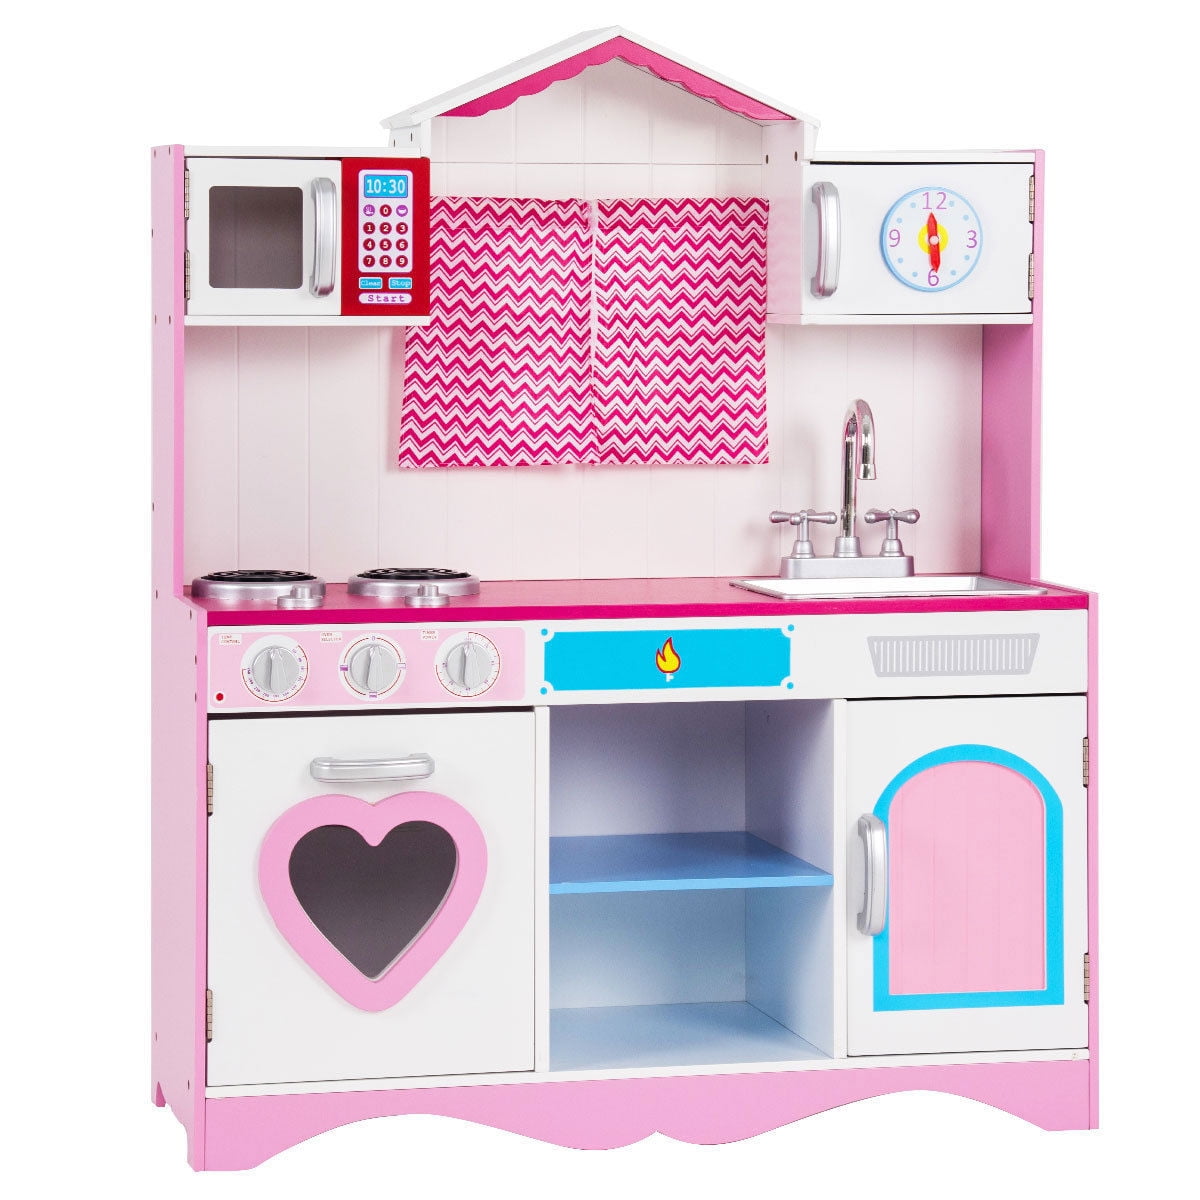 Cute Kitchen Pretend Play Cooking Set Cabinet Stove Toy Gift for Kids Children 